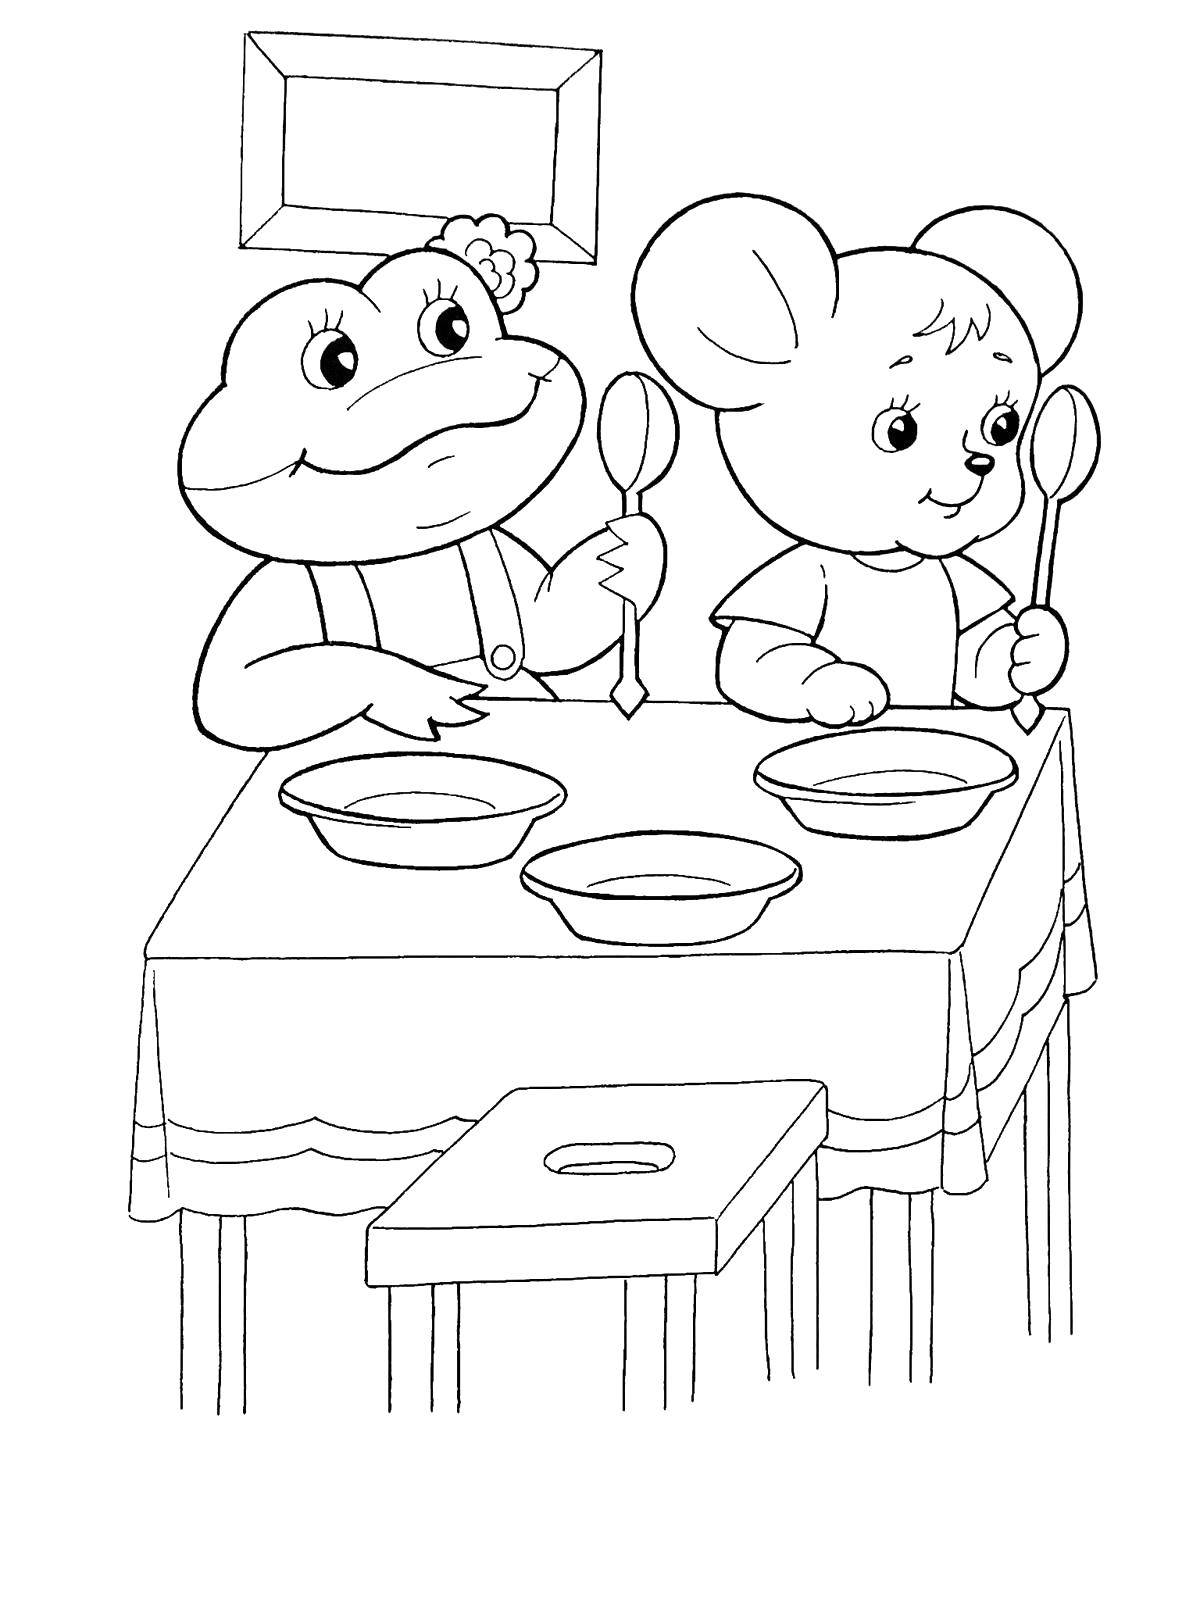 Coloring The frog and the mouse waiting for lunch. Category Coloring pages for kids. Tags:  Frog, mouse, lunch.